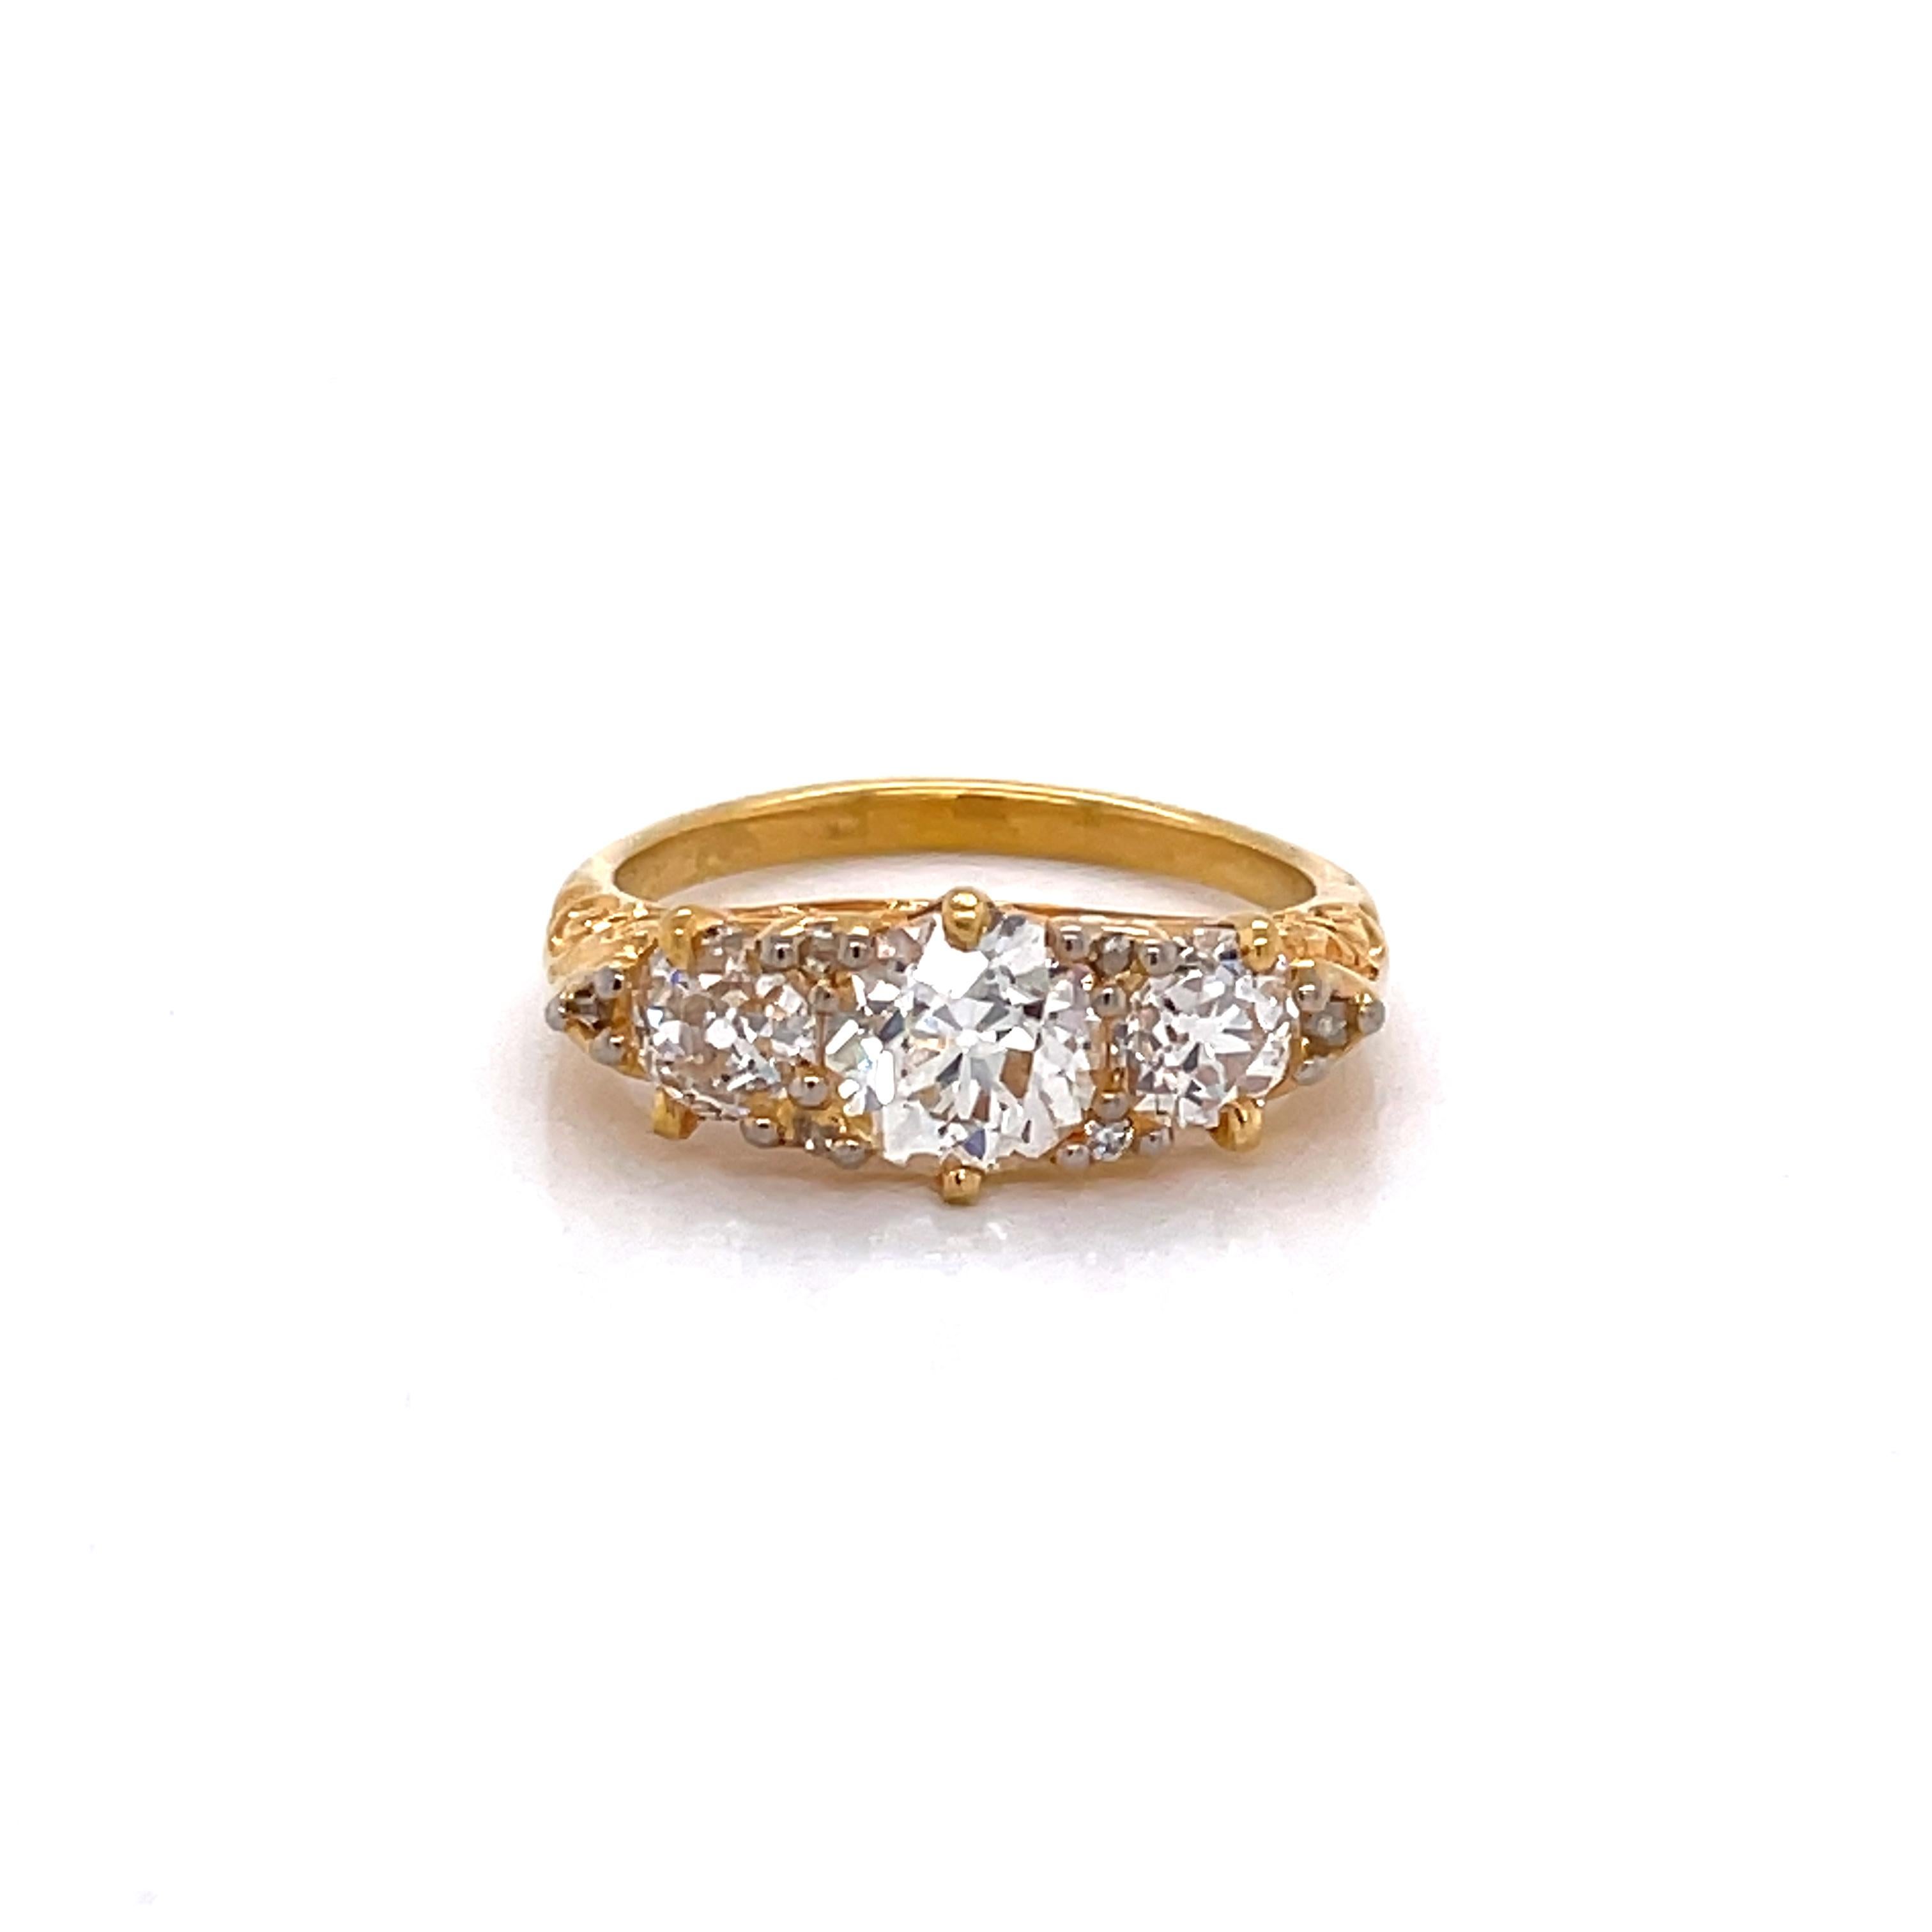 A romantic antique setting in eighteen karat 18 karat yellow gold cradles fine old European cut diamonds and illuminates this fine ring. Featured is one .90 carat G/I1 center stone which is flanked by two .345 carat H/SI diamonds and six .05 rose